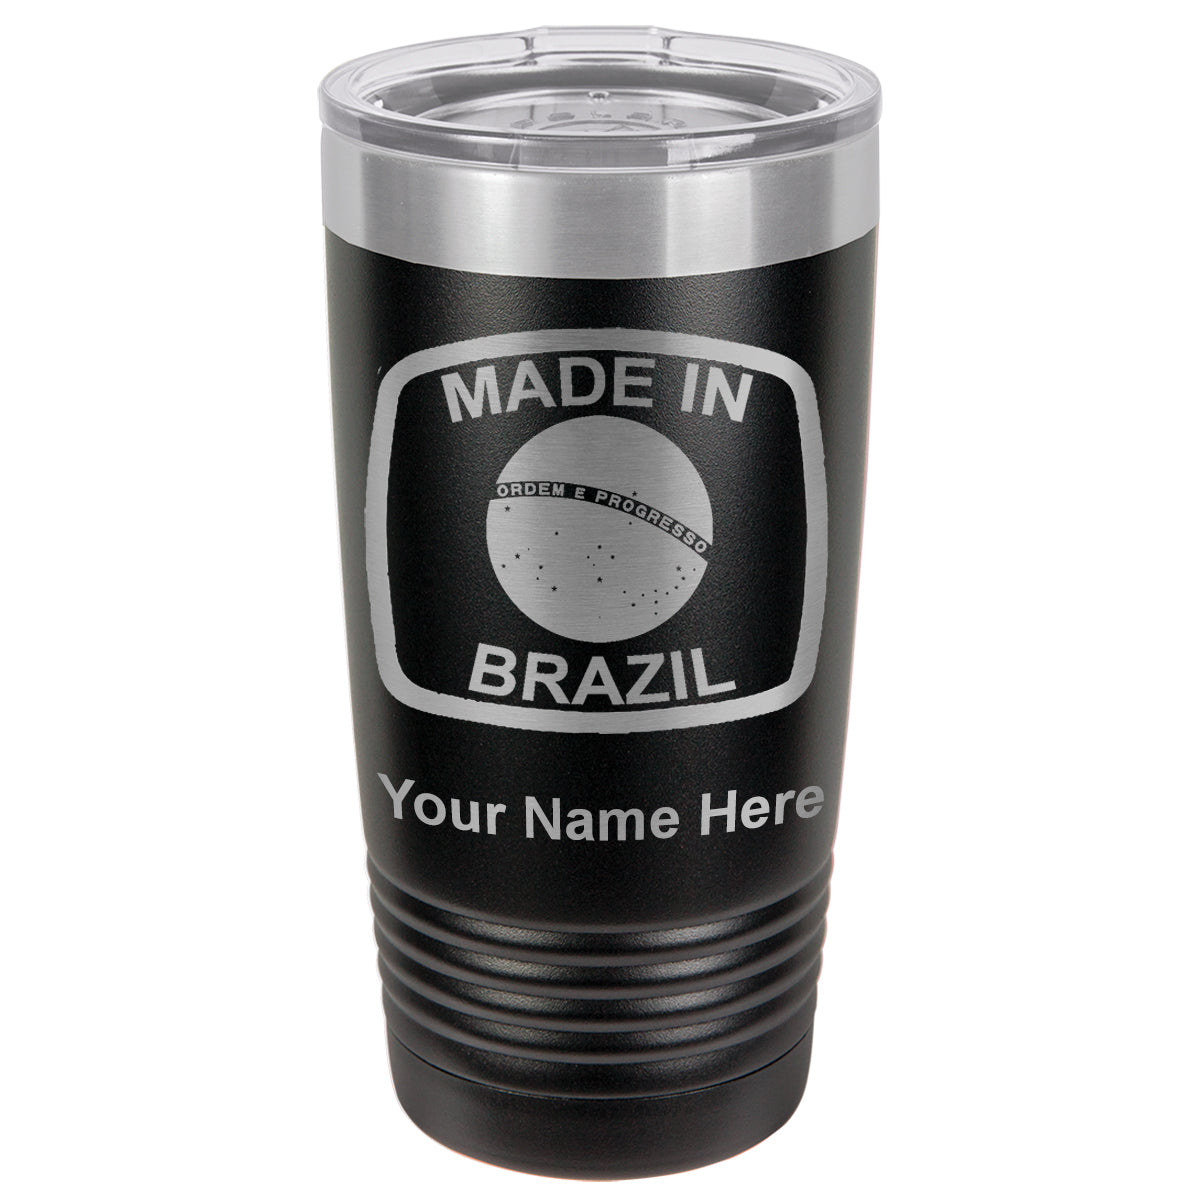 20oz Vacuum Insulated Tumbler Mug, Made in Brazil, Personalized Engraving Included